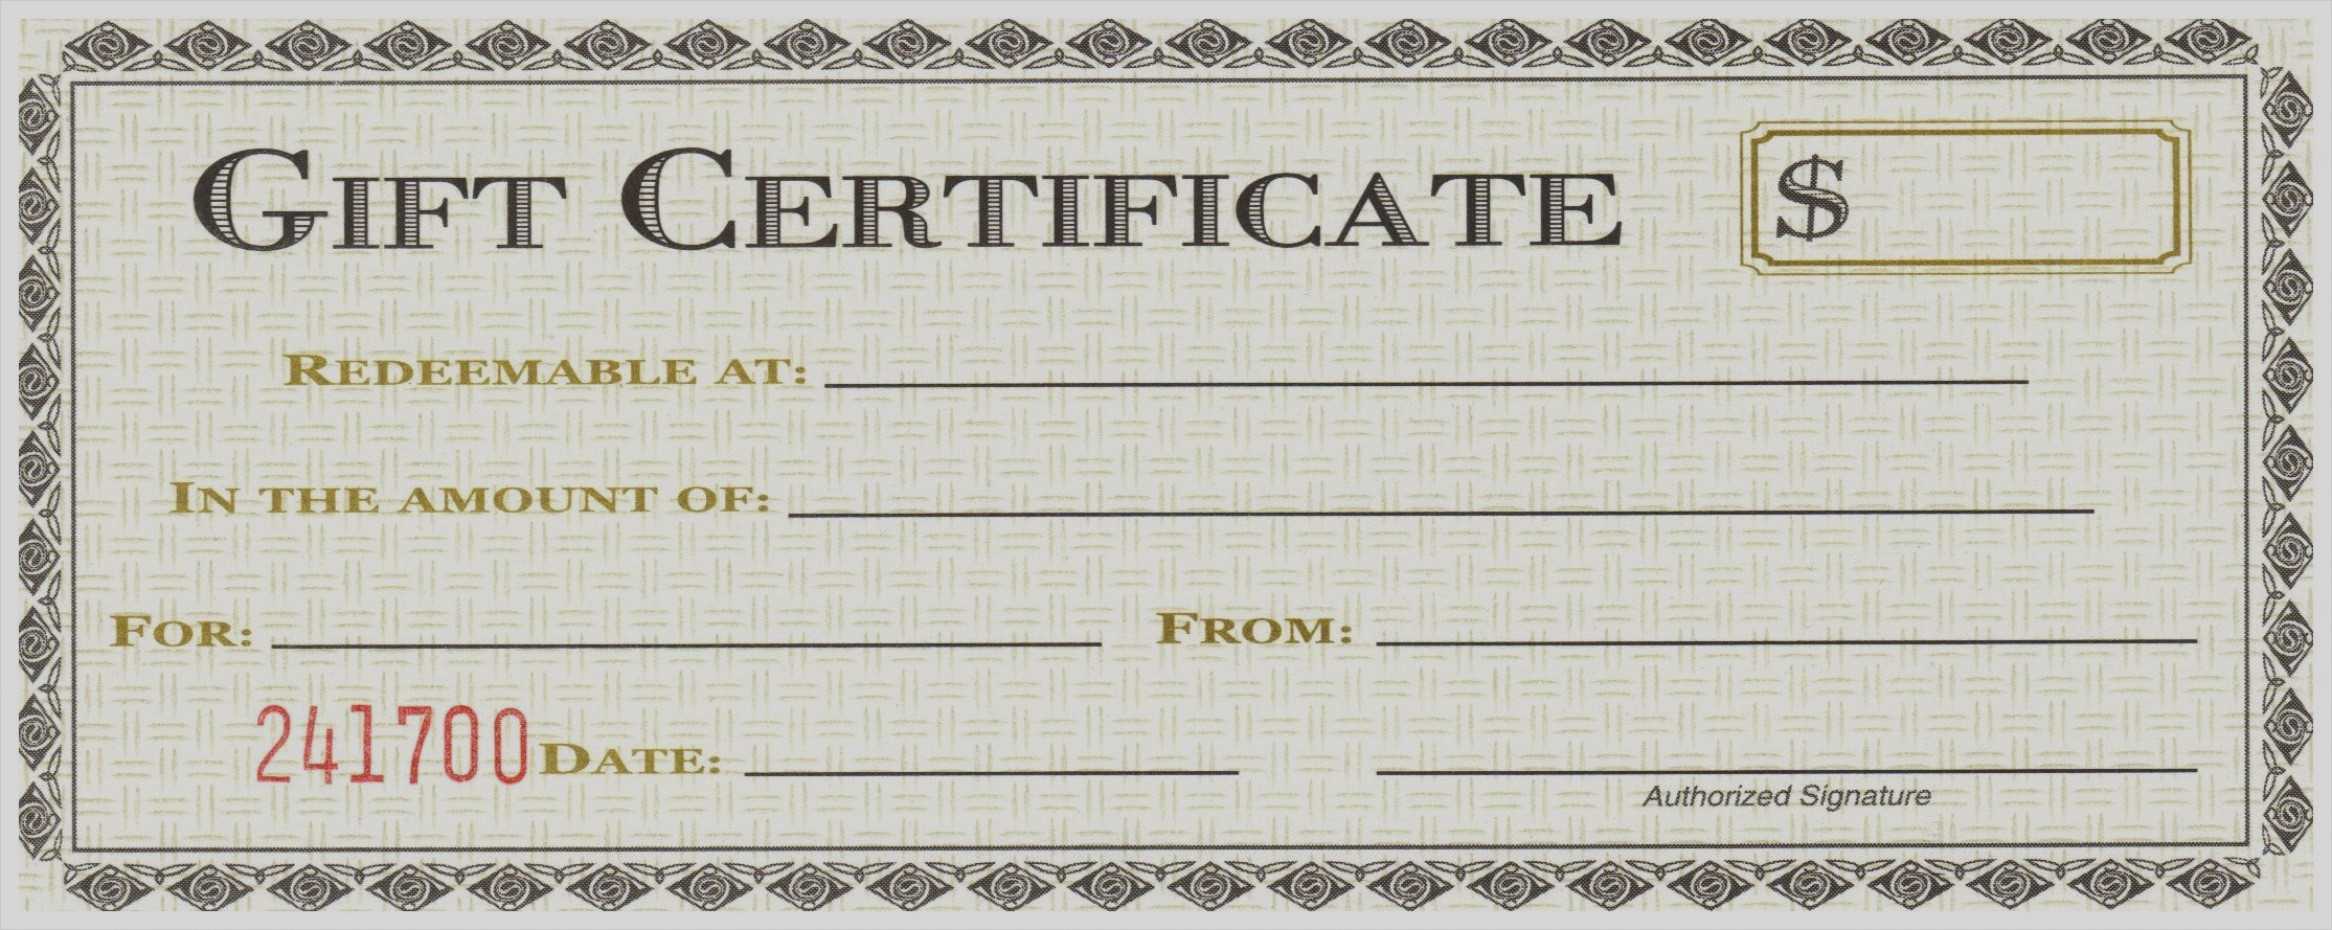 Free Printable Gift Vouchers Template Certificate Templates Inside Pages Certificate Templates